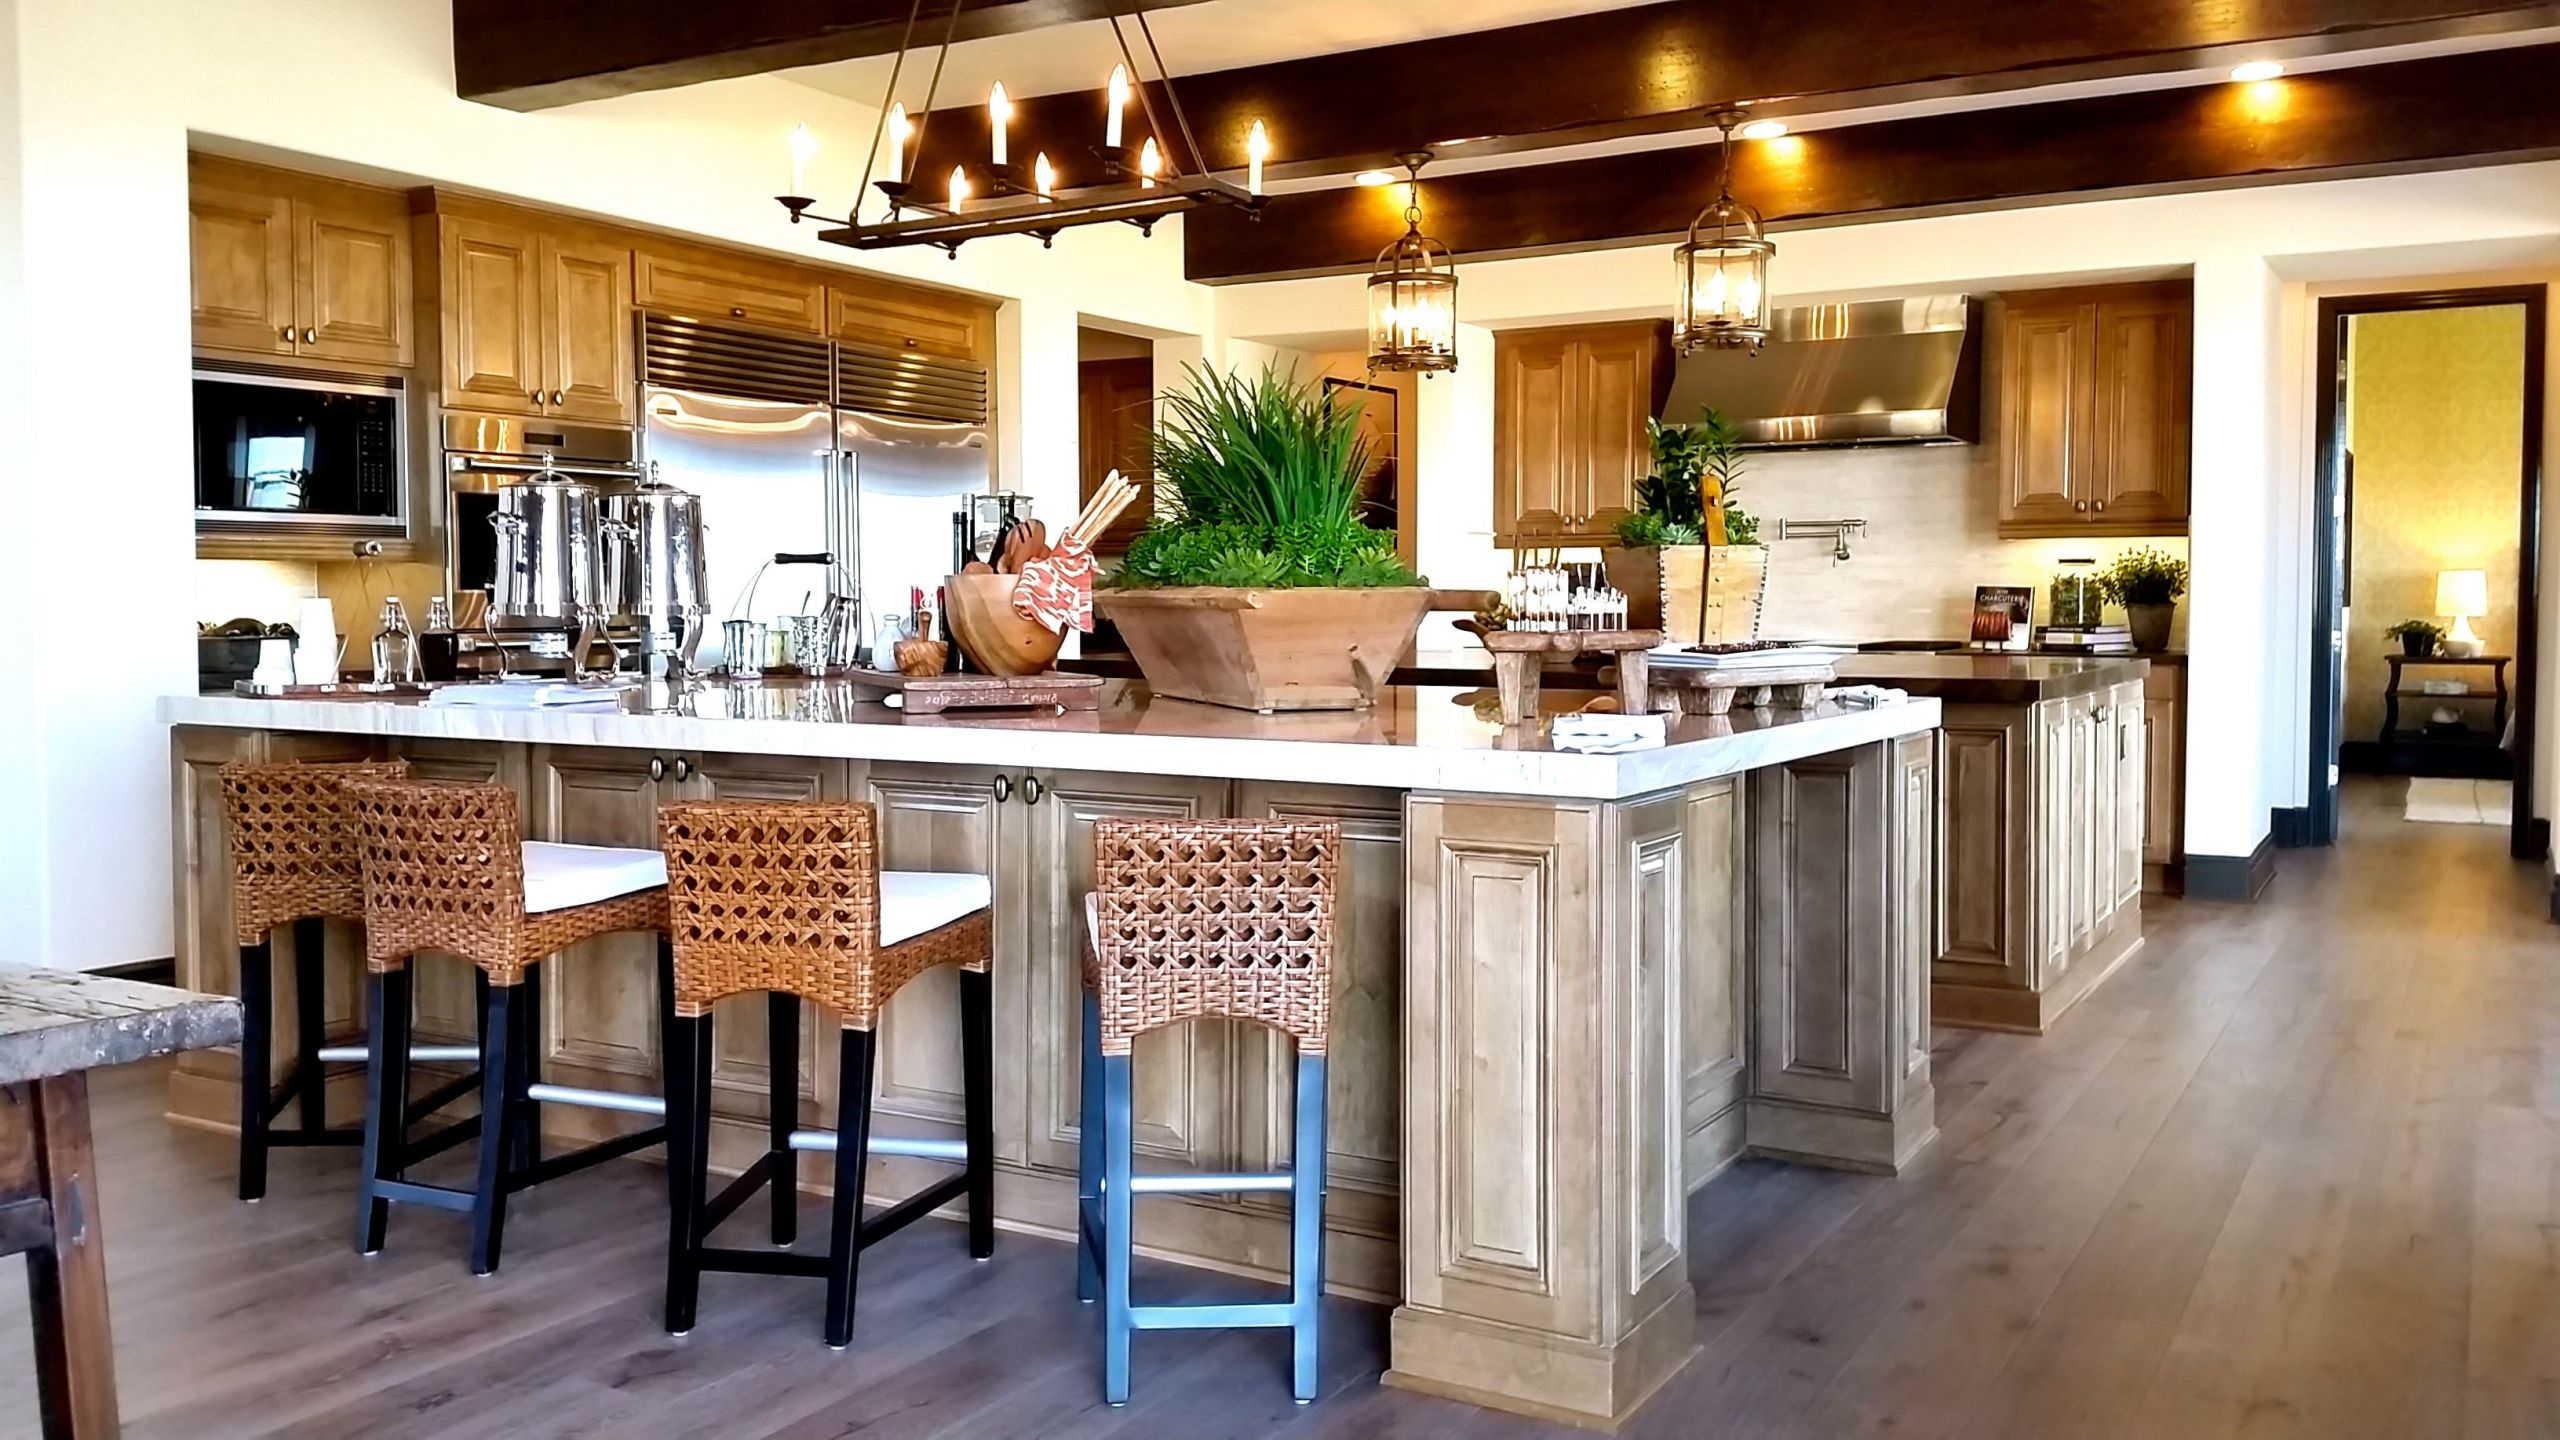 Rustic Kitchen Island With Seating
 Charming rustic wooden accents on this large kitchen